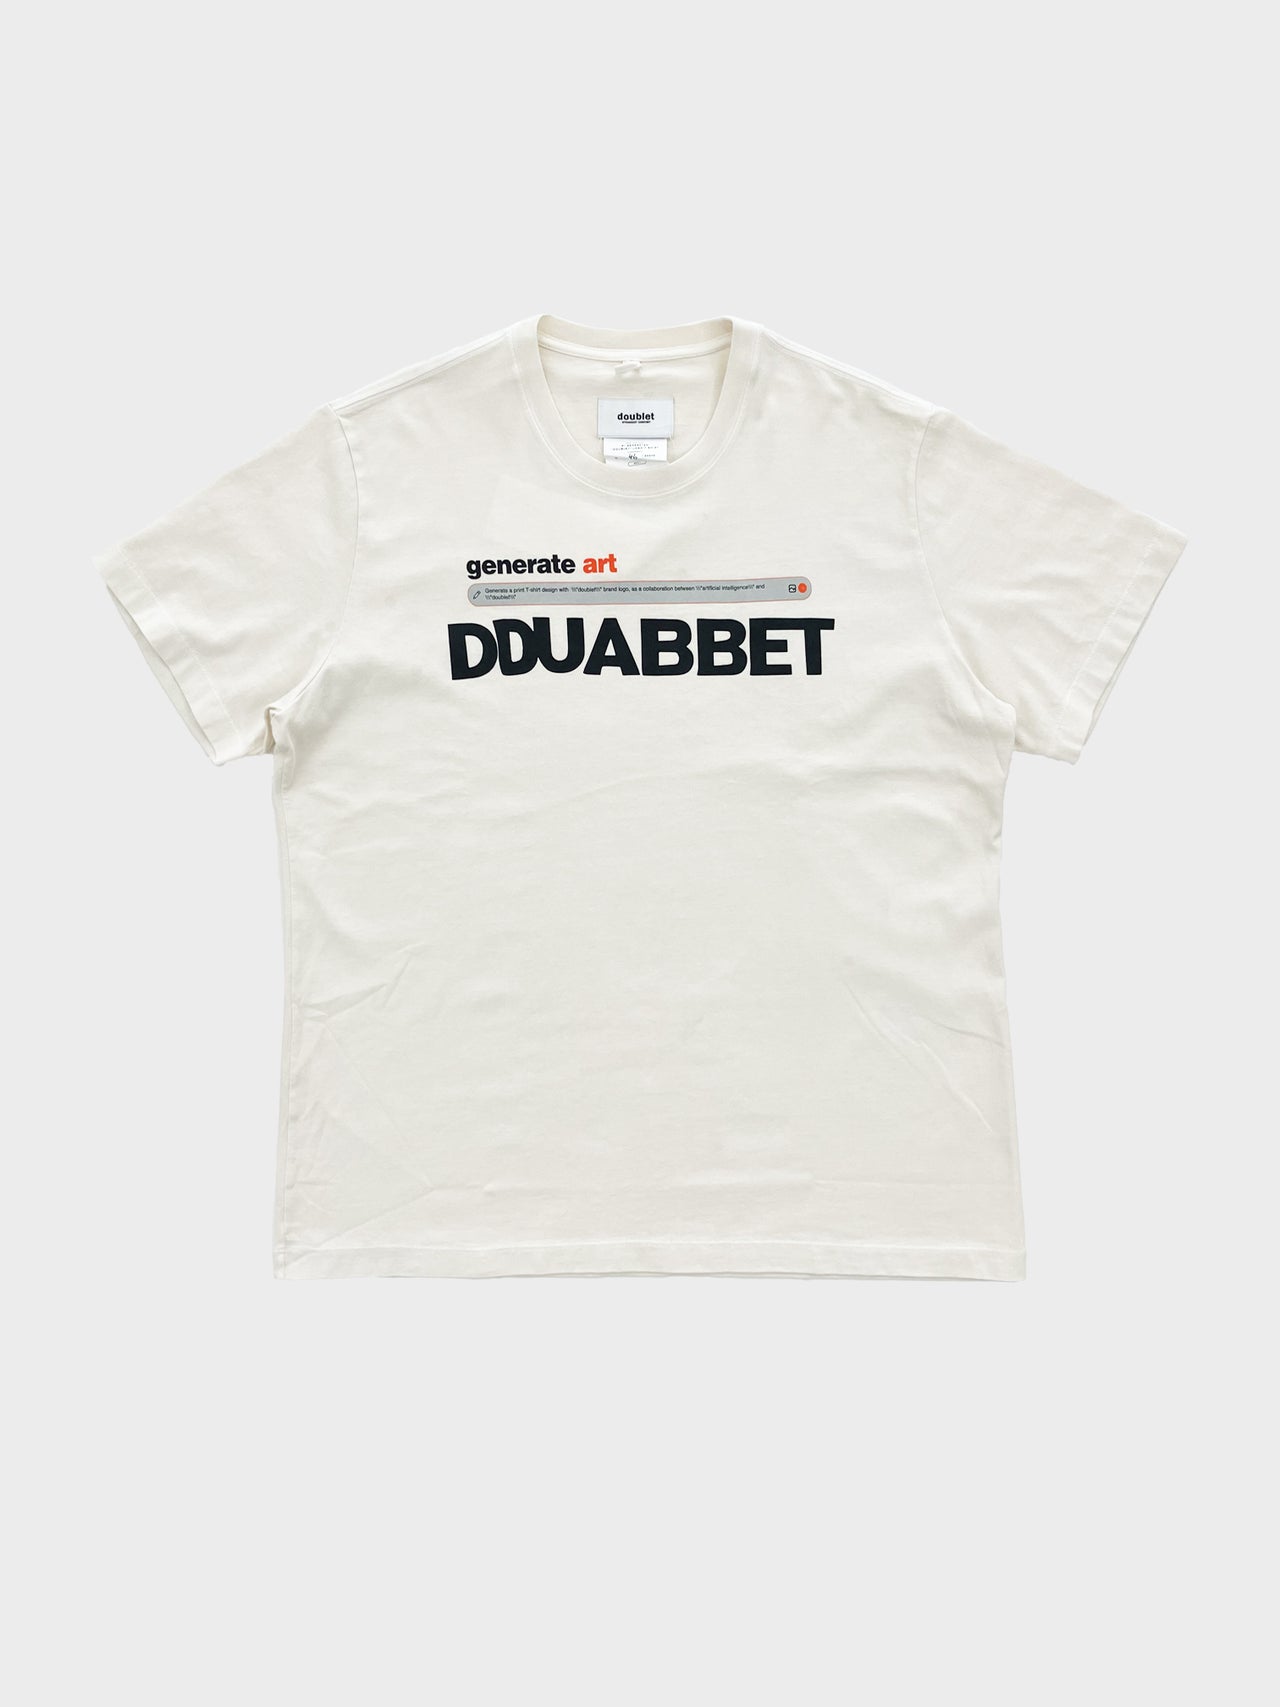 doublet / AI-GENERATED "DOUBLET" LOGO T-SHIRT (WHITE)